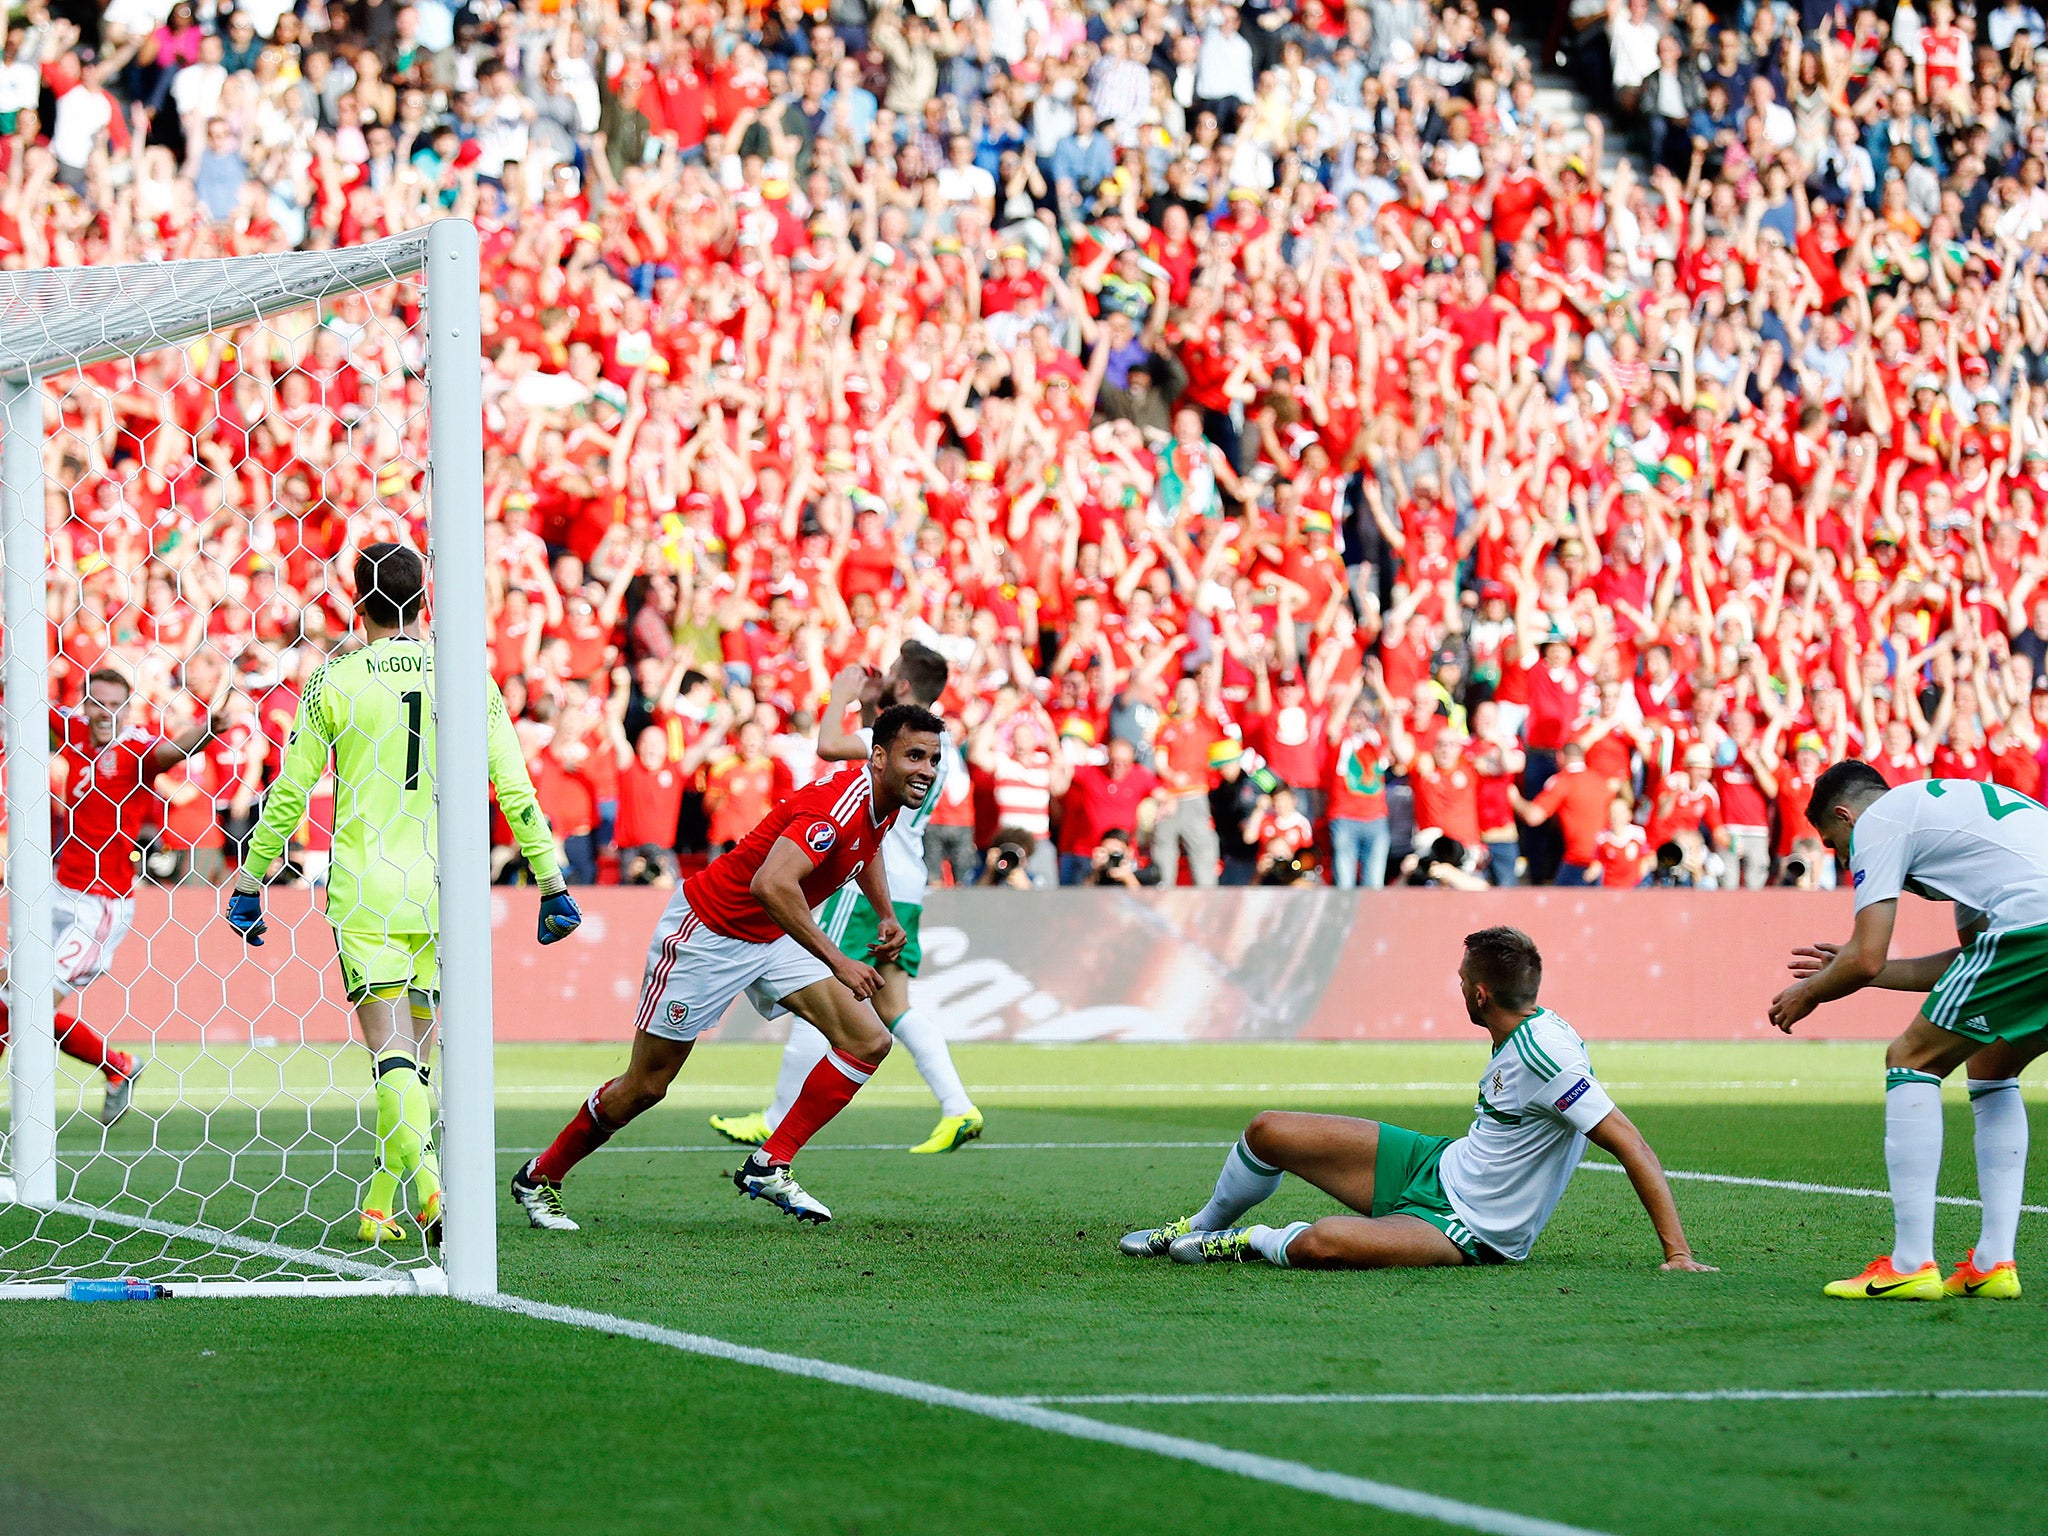 Gareth McAuley deflects the ball into his own net in Northern Ireland's defeat by Wales